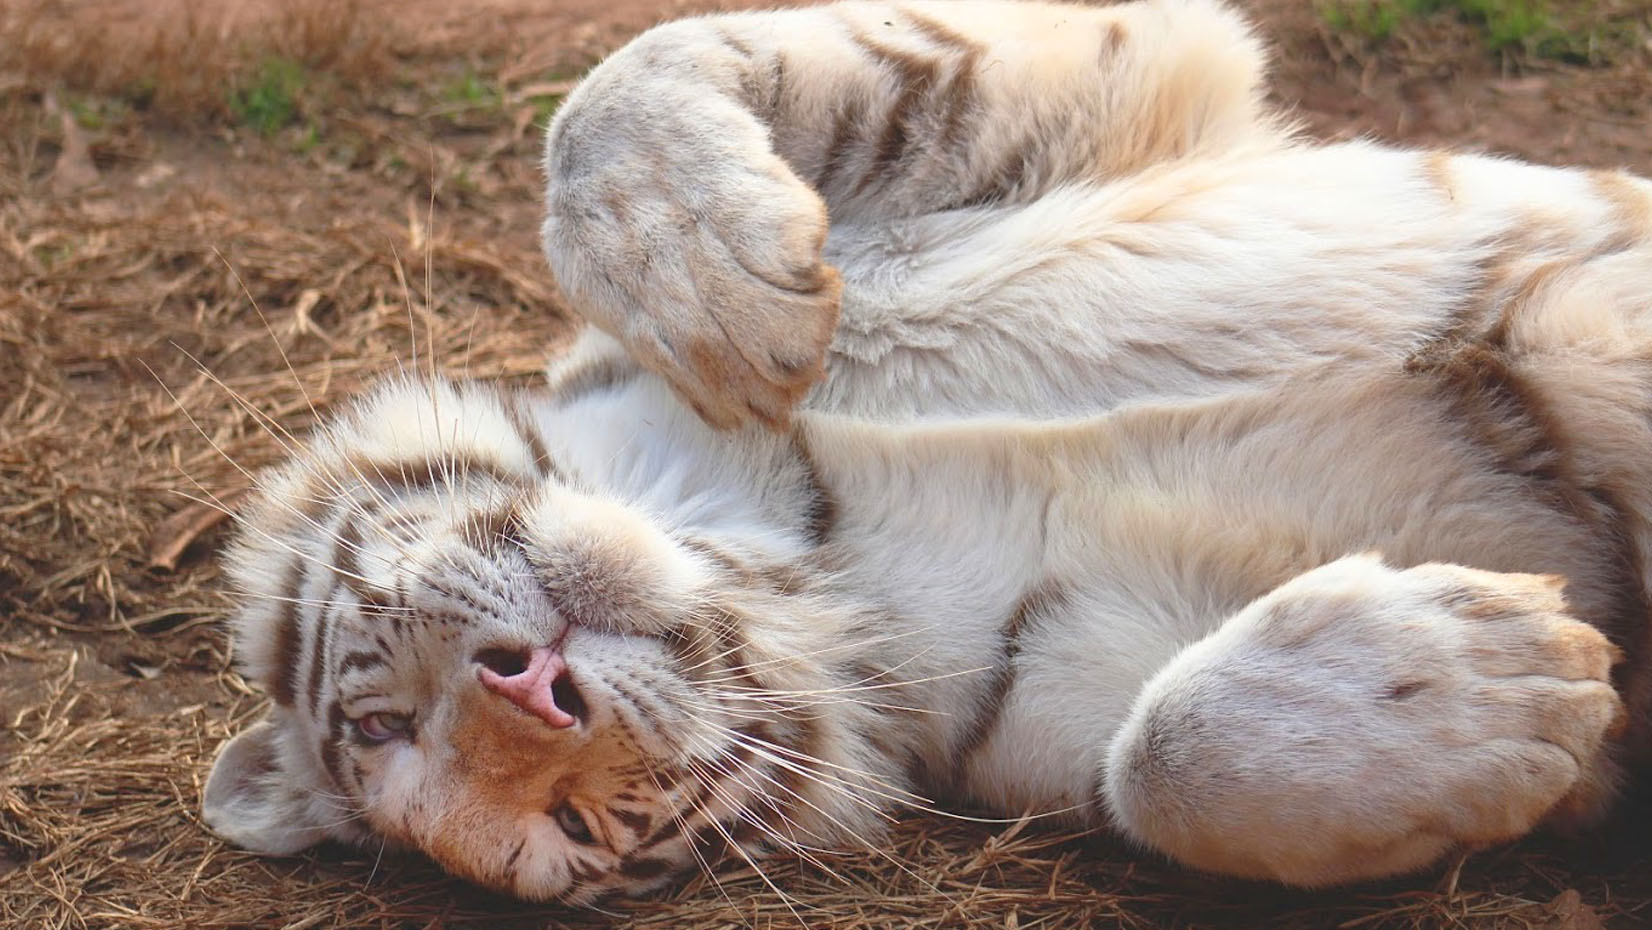 7 Ways To Keep Your global tiger Growing Without Burning The Midnight Oil